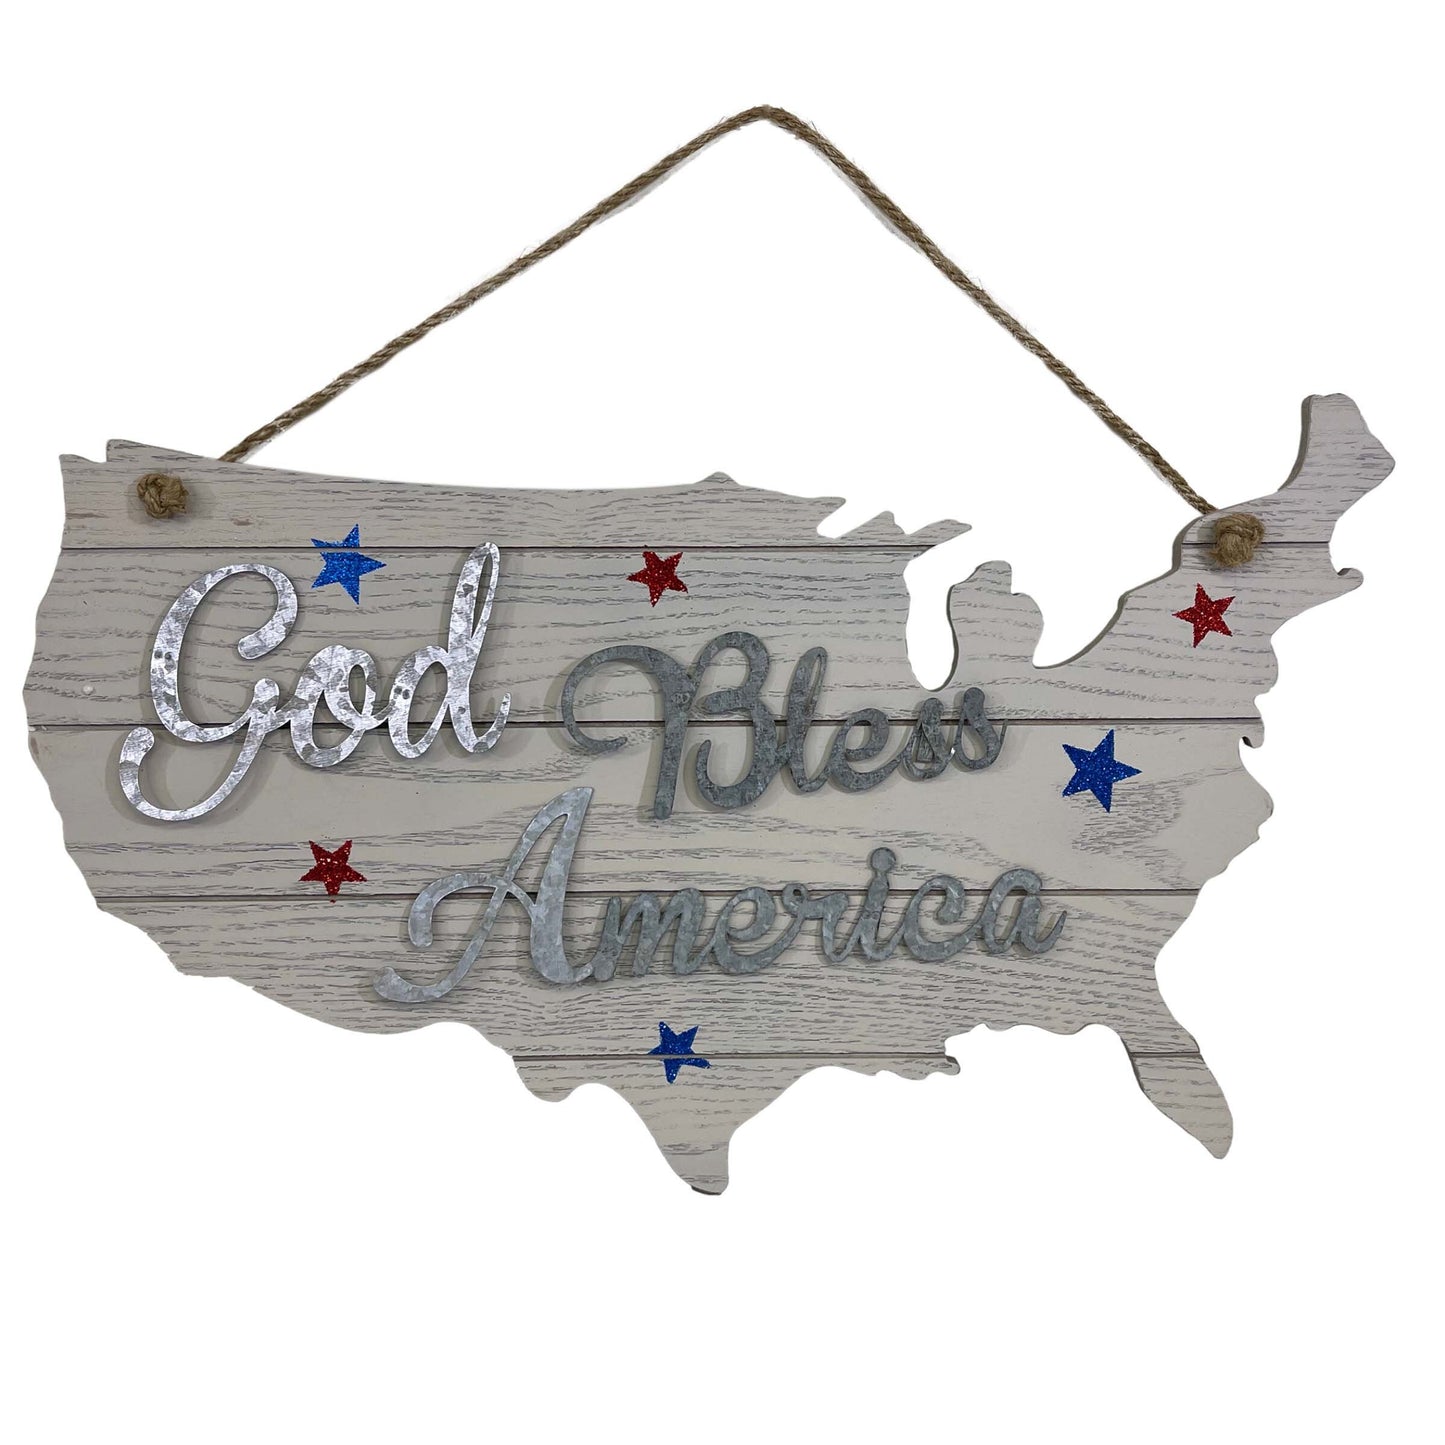 God Bless America Wall Sign Decor | 4th of July Rustic Home Decor